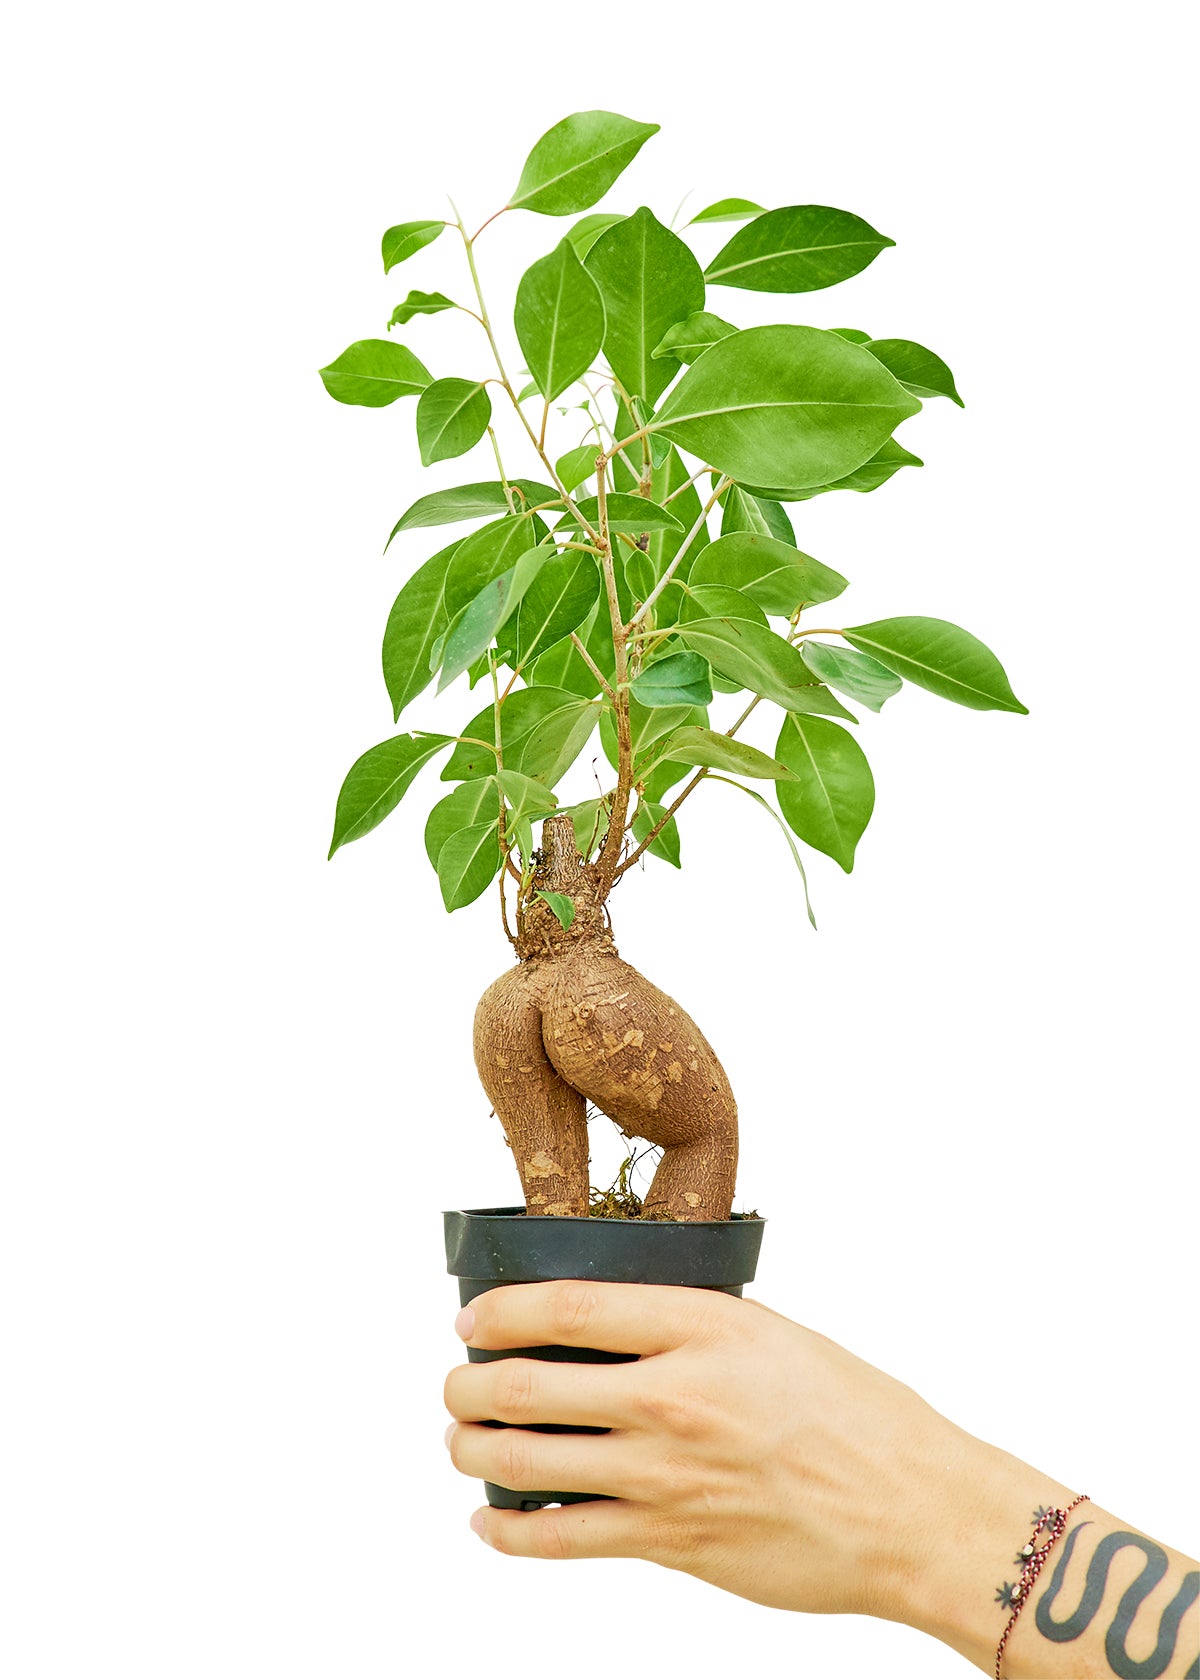 Ficus 'Ginseng', Small